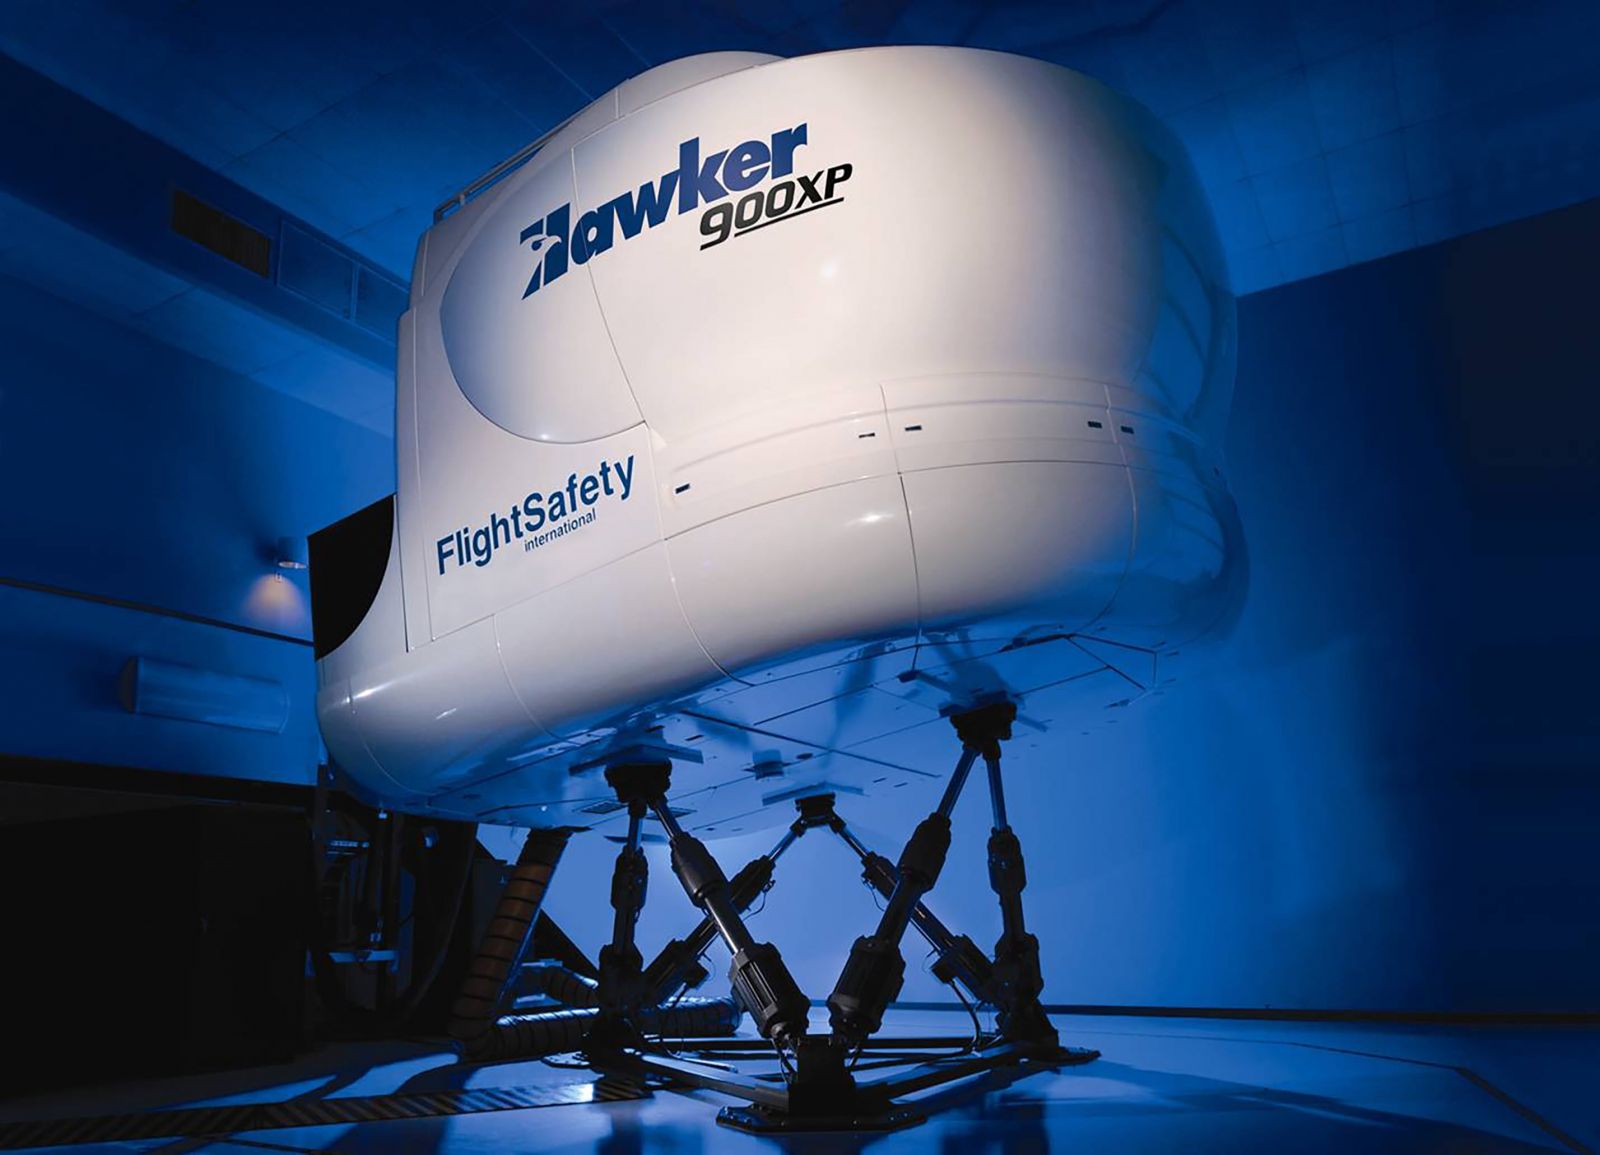 The Hawker 900XP full flight simulator will be added to extensive suite of training devices for students in Purdue Polytechnic Institute’s School of Aviation and Transportation Technology. (Purdue University photo/Polytechnic Institute) A publication-quality photo is available at https://news.uns.purdue.edu/images/2019/hawker-simulator.jpg